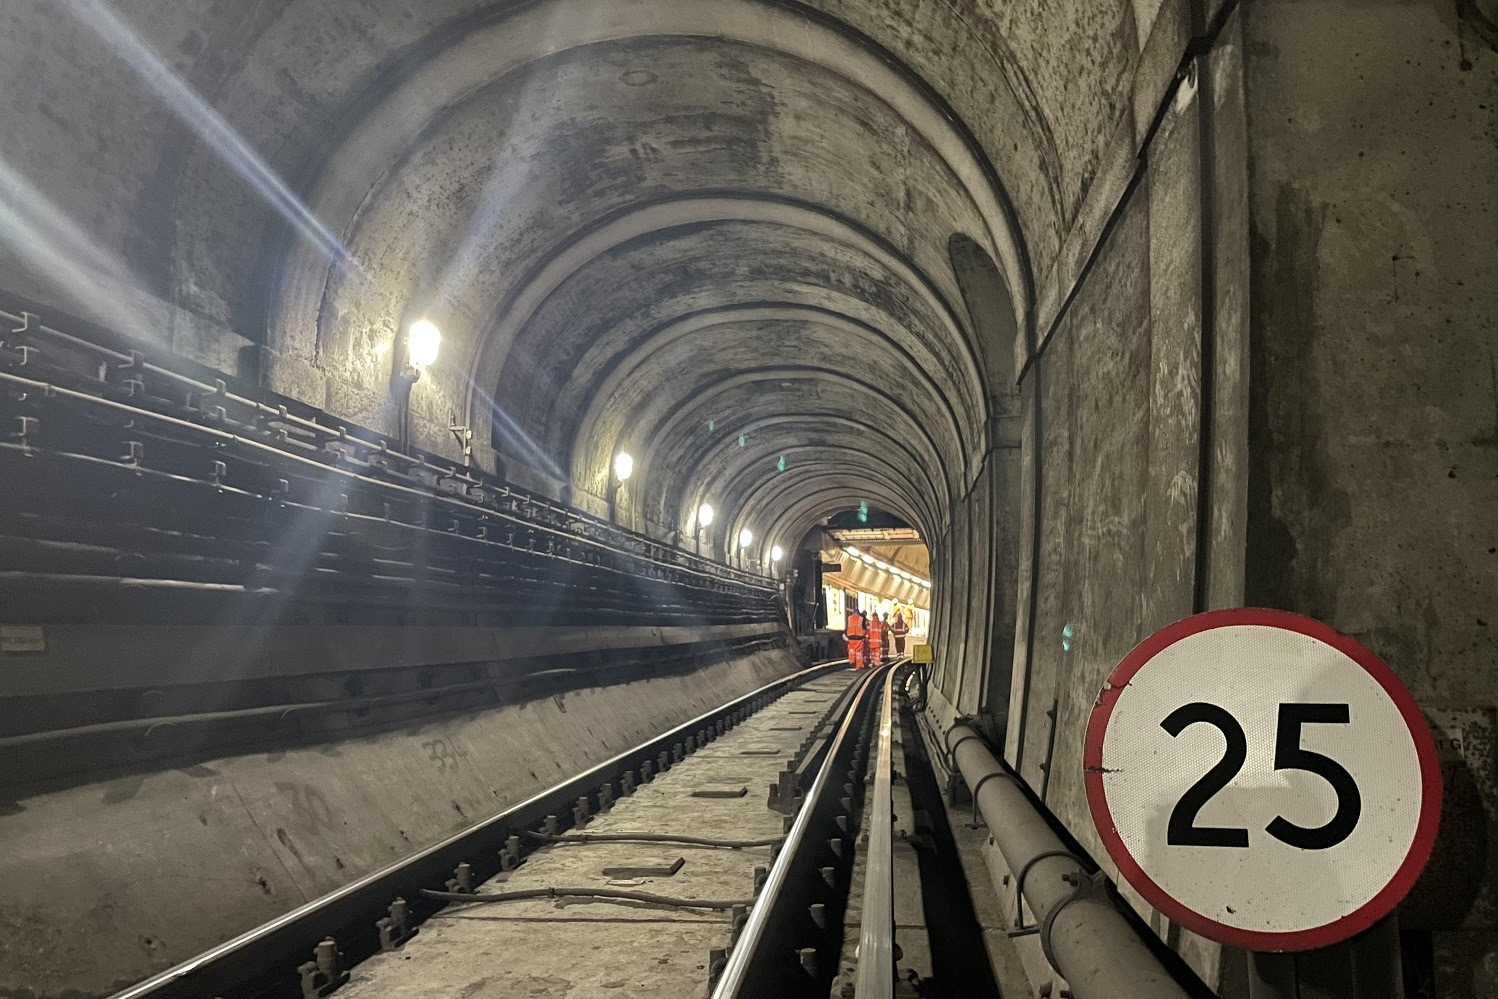 Arched single track railway tunnel with 25 mph sign and group of workers wearing orange high vis